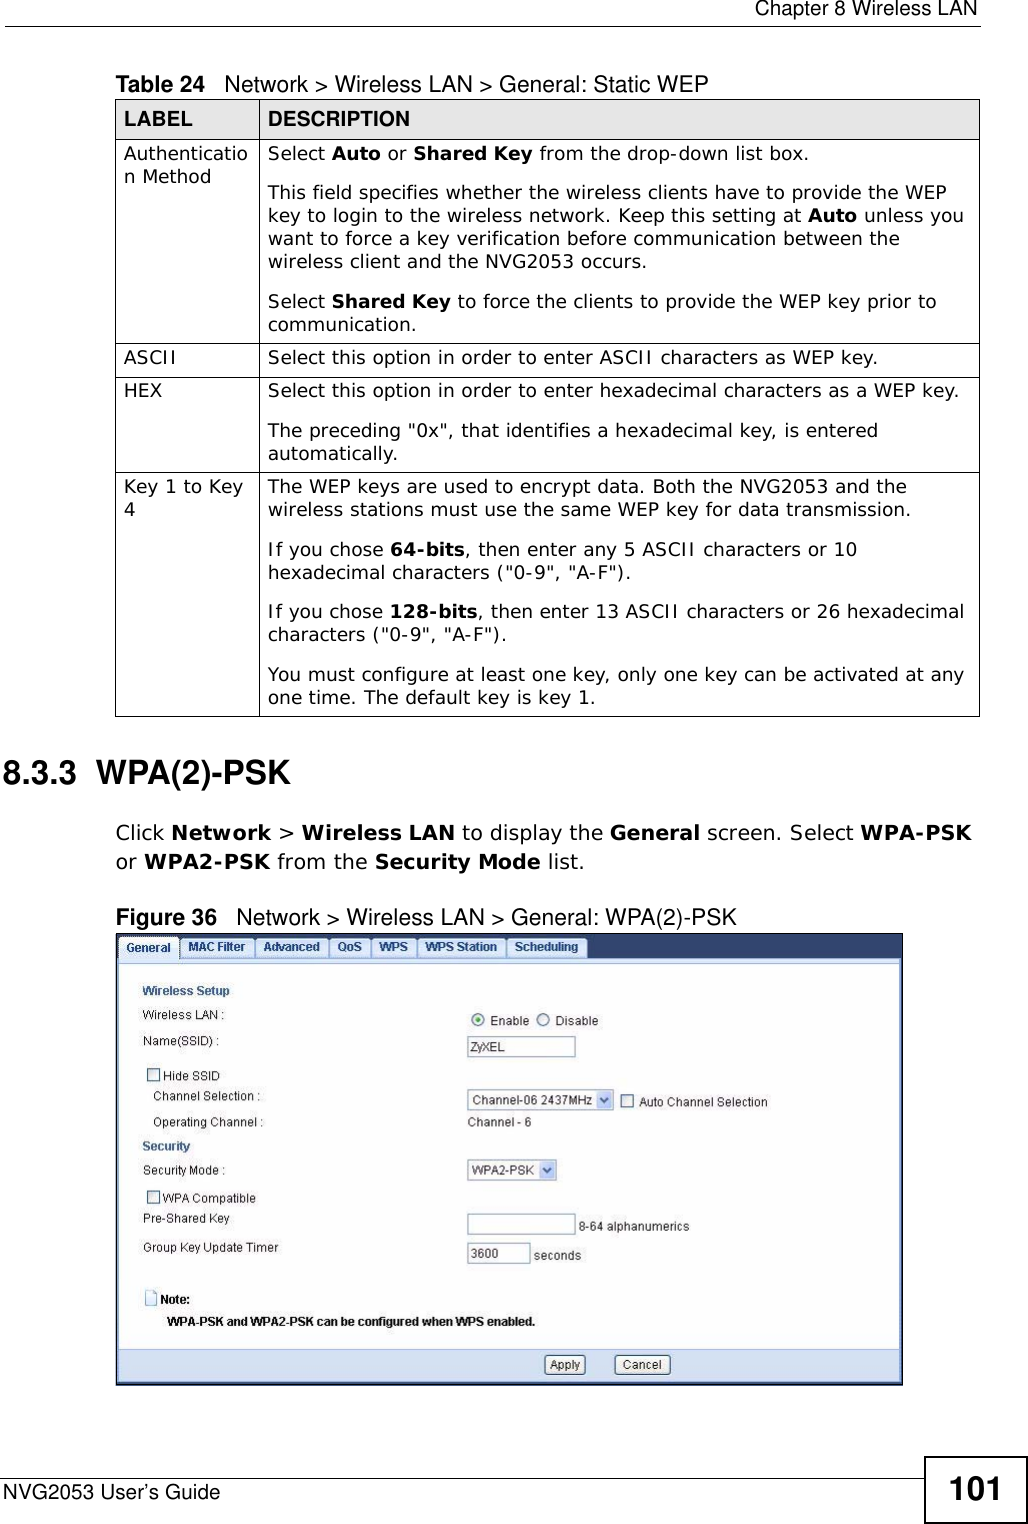  Chapter 8 Wireless LANNVG2053 User’s Guide 1018.3.3  WPA(2)-PSKClick Network &gt; Wireless LAN to display the General screen. Select WPA-PSK or WPA2-PSK from the Security Mode list.Figure 36   Network &gt; Wireless LAN &gt; General: WPA(2)-PSKAuthentication Method Select Auto or Shared Key from the drop-down list box.This field specifies whether the wireless clients have to provide the WEP key to login to the wireless network. Keep this setting at Auto unless you want to force a key verification before communication between the wireless client and the NVG2053 occurs. Select Shared Key to force the clients to provide the WEP key prior to communication.  ASCII Select this option in order to enter ASCII characters as WEP key. HEX Select this option in order to enter hexadecimal characters as a WEP key. The preceding &quot;0x&quot;, that identifies a hexadecimal key, is entered automatically.Key 1 to Key 4The WEP keys are used to encrypt data. Both the NVG2053 and the wireless stations must use the same WEP key for data transmission.If you chose 64-bits, then enter any 5 ASCII characters or 10 hexadecimal characters (&quot;0-9&quot;, &quot;A-F&quot;).If you chose 128-bits, then enter 13 ASCII characters or 26 hexadecimal characters (&quot;0-9&quot;, &quot;A-F&quot;). You must configure at least one key, only one key can be activated at any one time. The default key is key 1.Table 24   Network &gt; Wireless LAN &gt; General: Static WEPLABEL DESCRIPTION